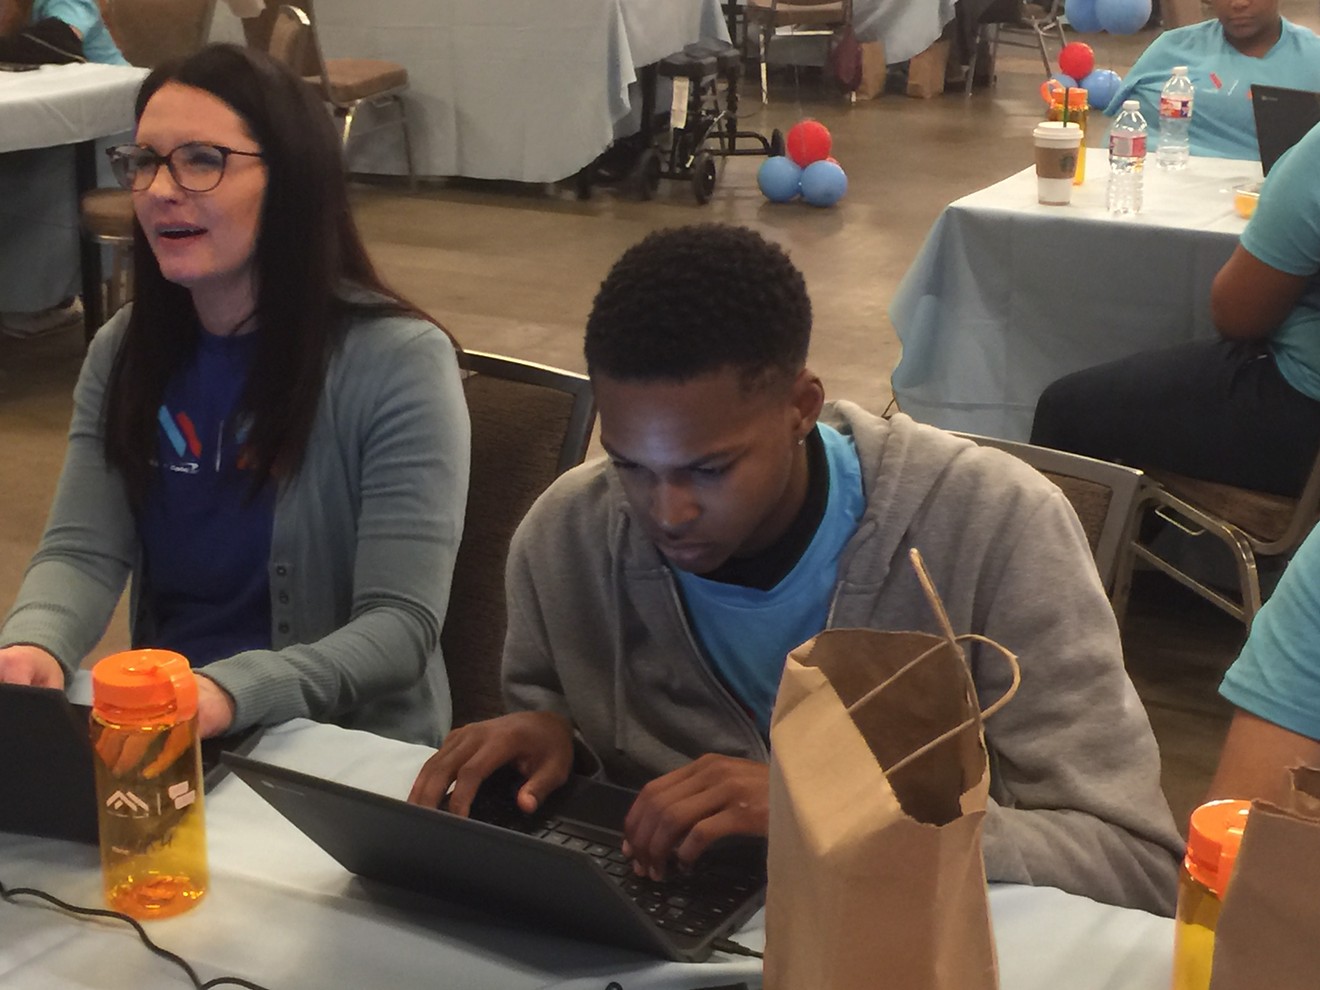 North Dallas High School junior Kevontae Harris works on the code for an artificial intelligence program during a Guinness world record attempt for the largest AI programming lesson on Wednesday at the Hilton Anatole.